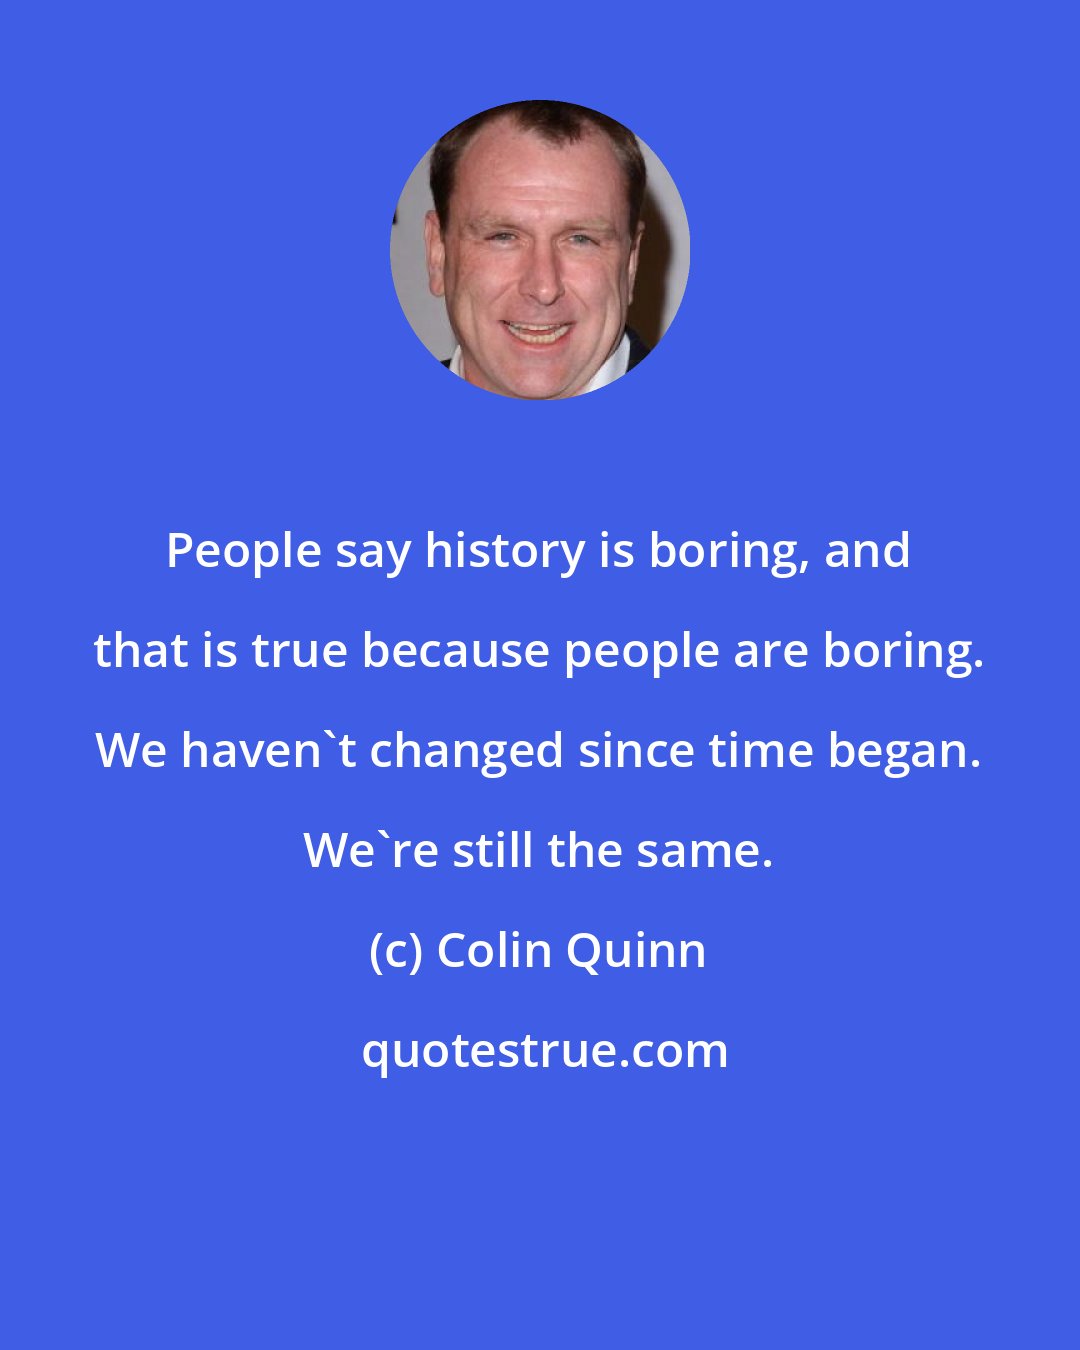 Colin Quinn: People say history is boring, and that is true because people are boring. We haven't changed since time began. We're still the same.